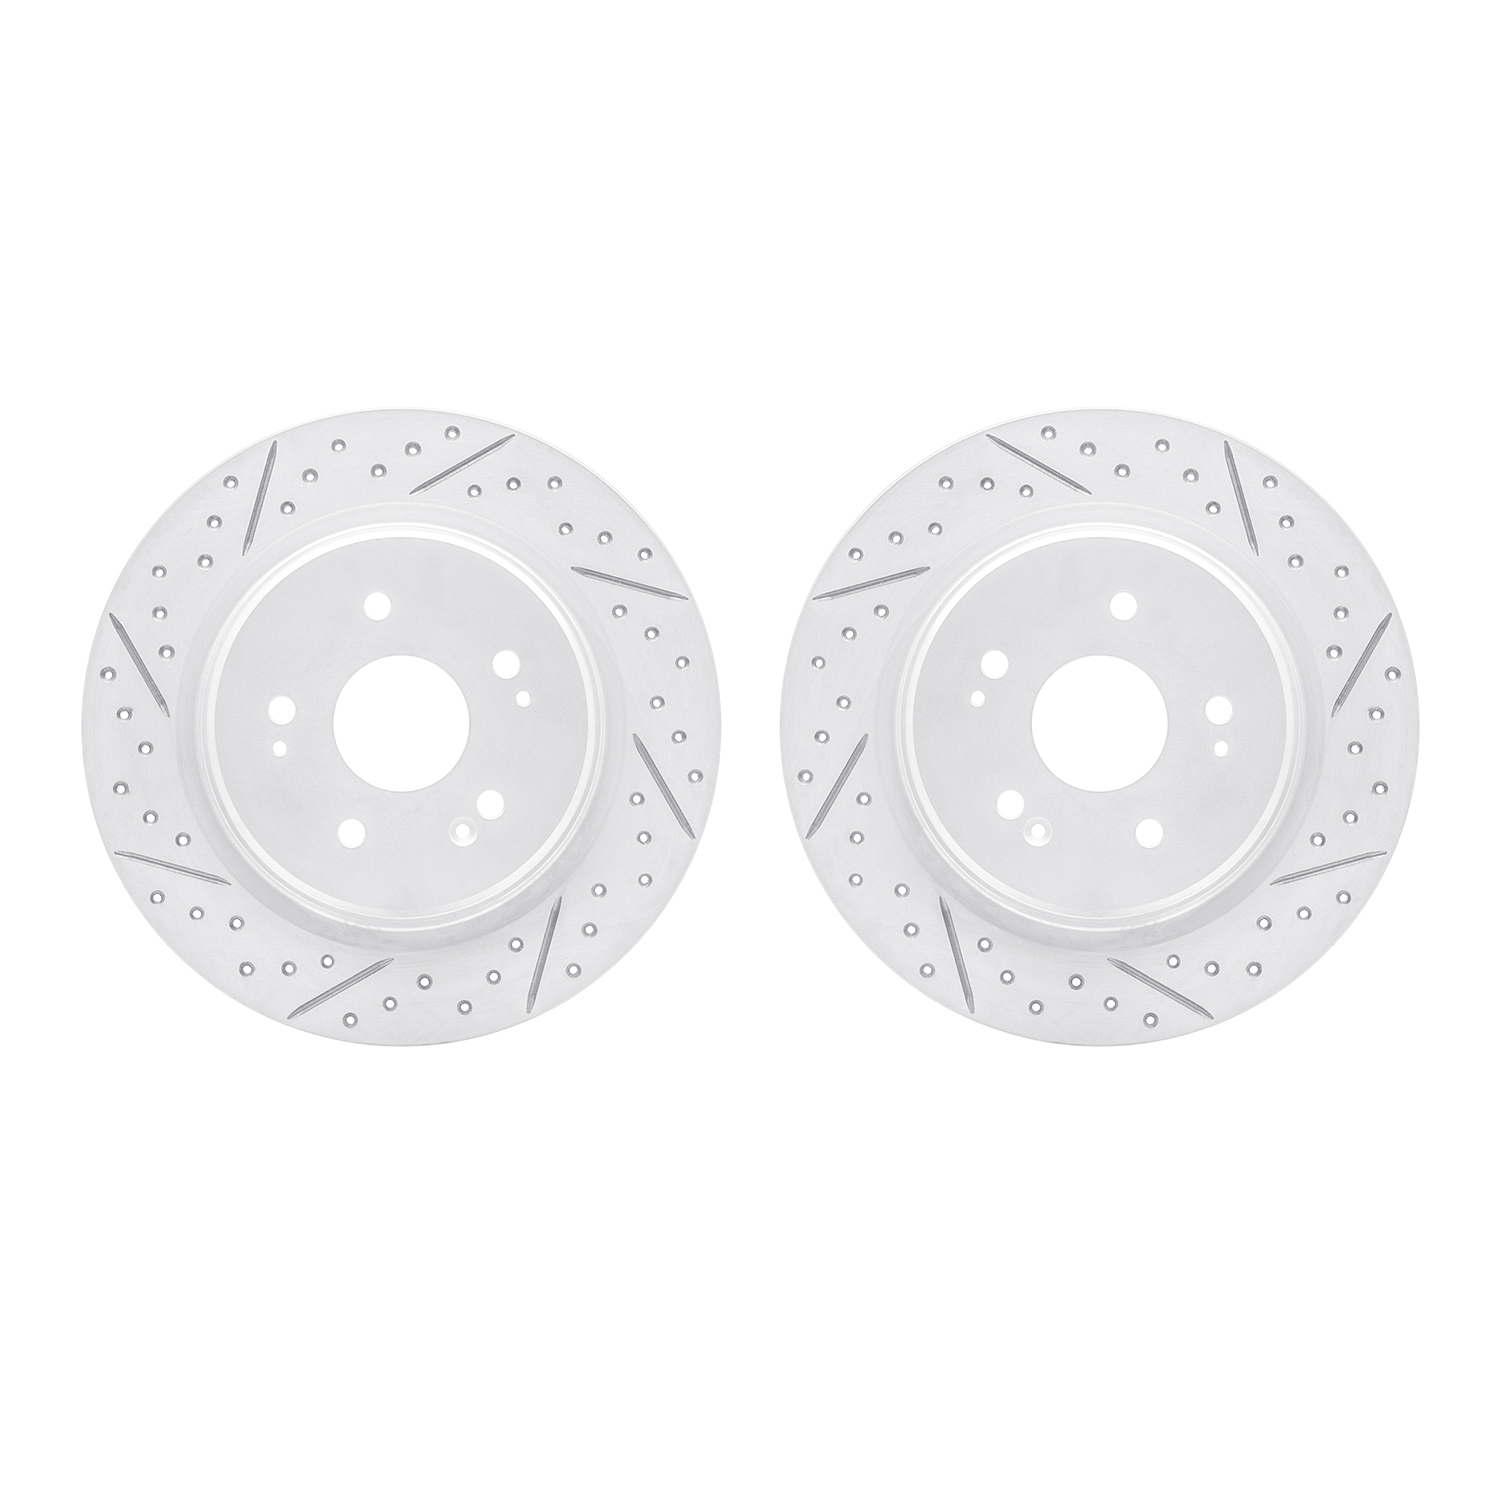 2002-58020 Geoperformance Drilled/Slotted Brake Rotors, Fits Select Acura/Honda, Position: Rear